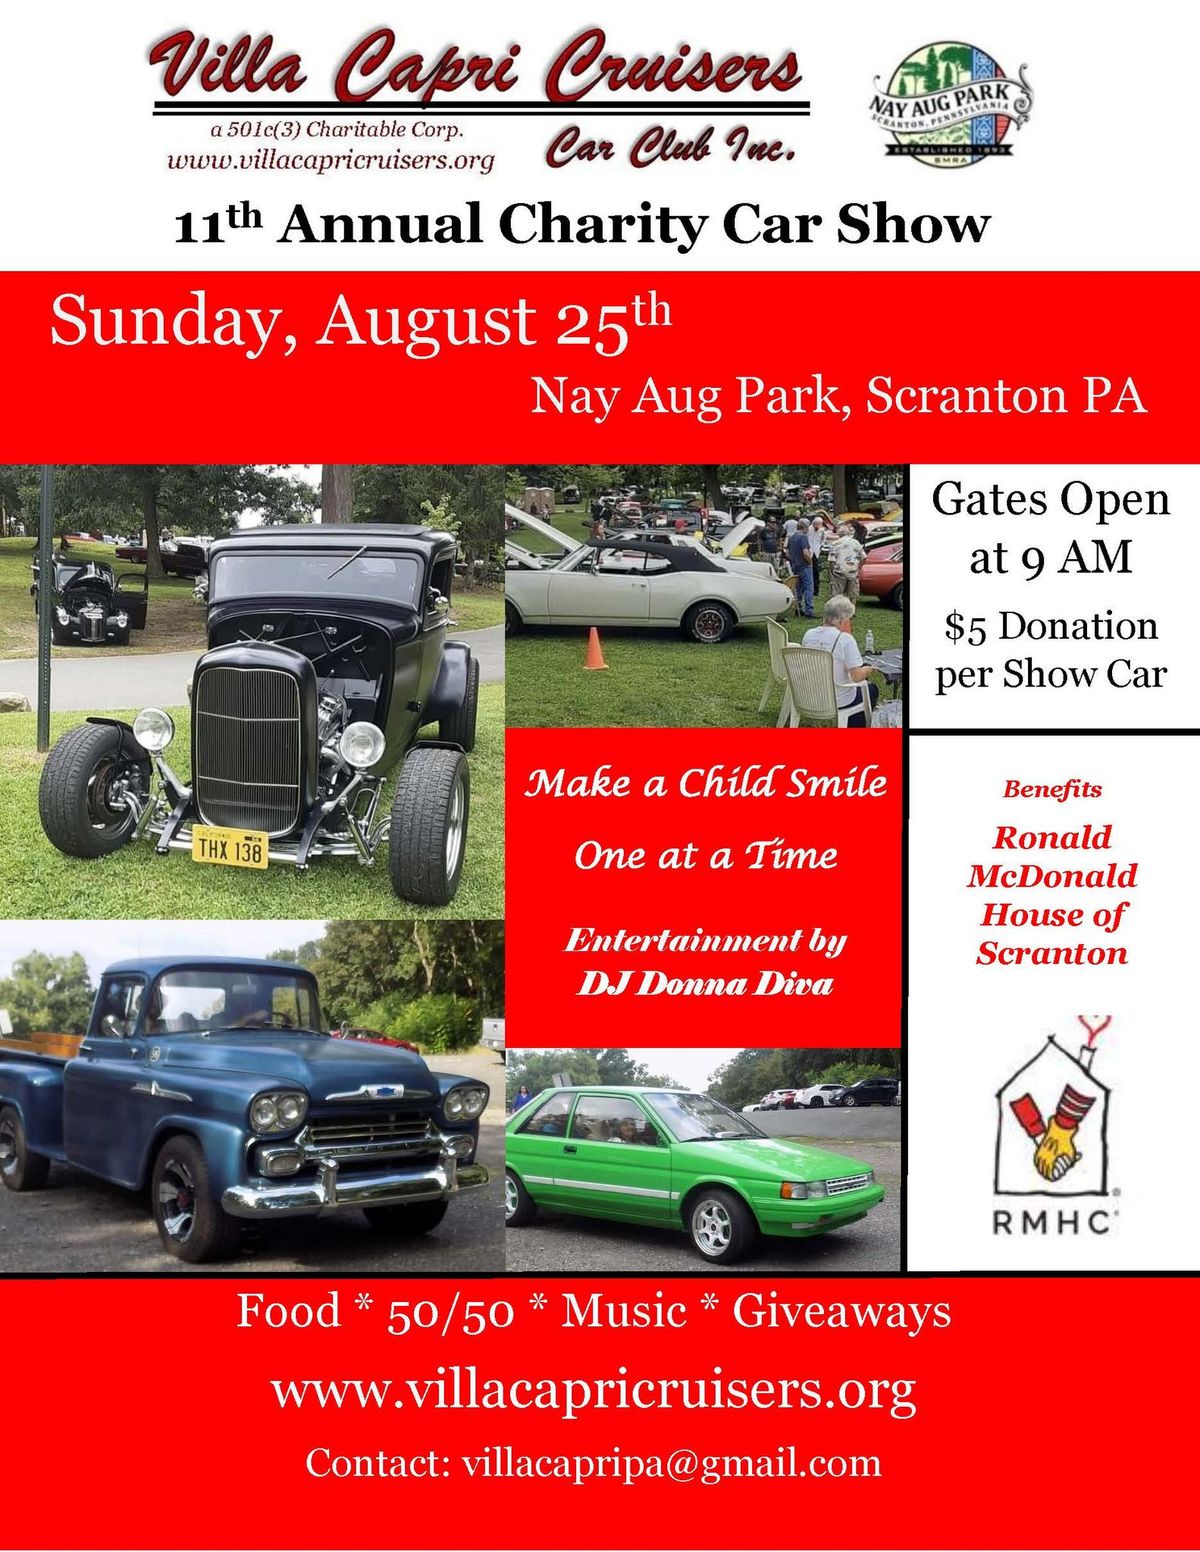 11th Annual Charity Car Show for Ronald McDonald House